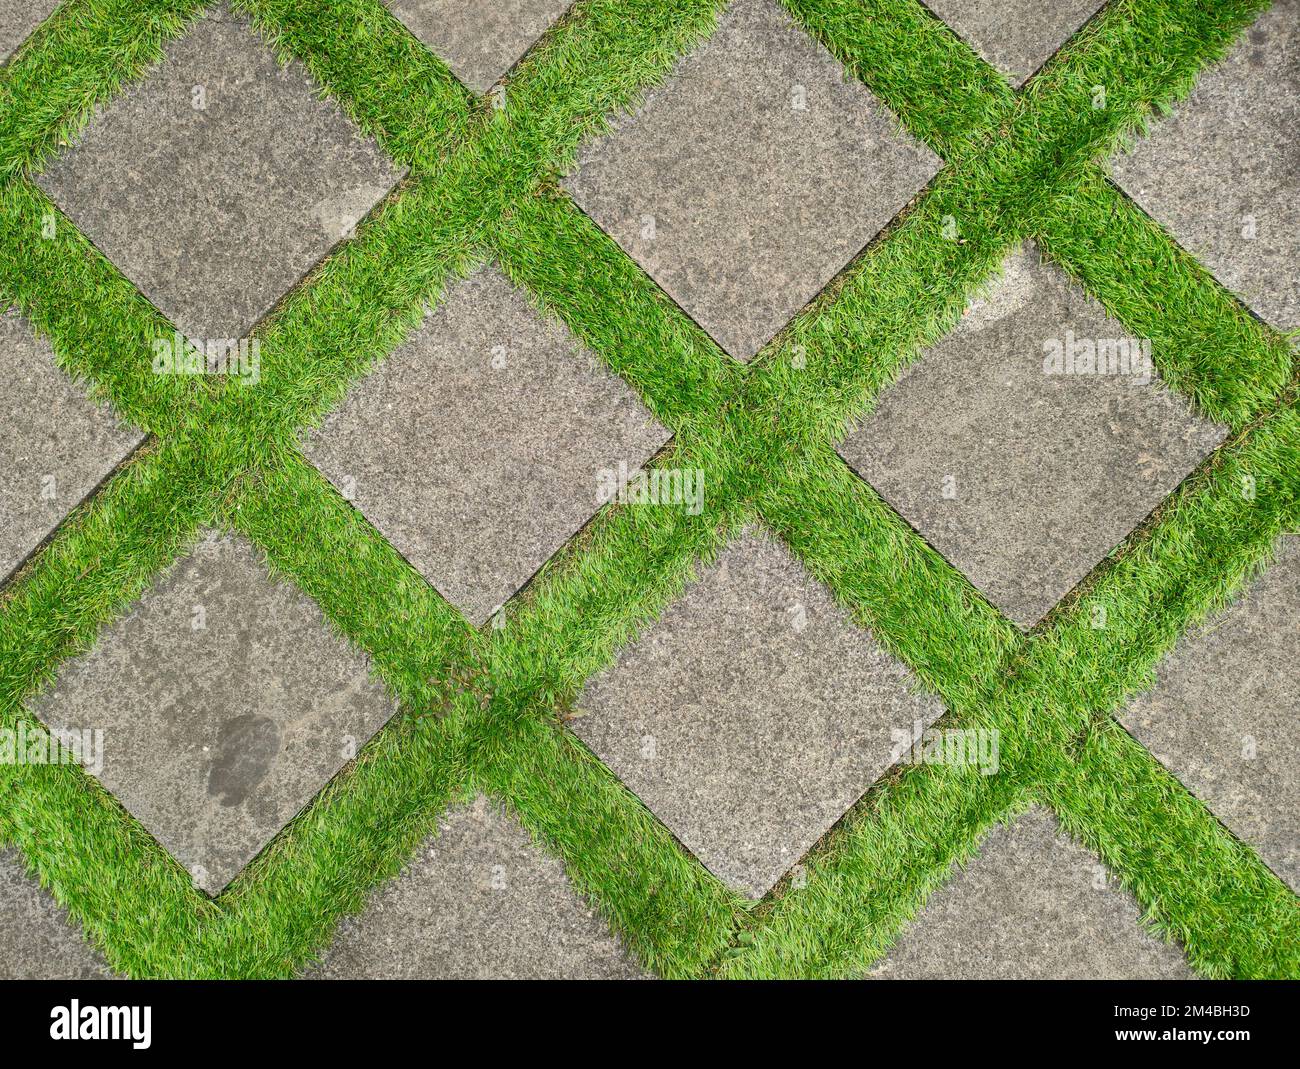 Flat lay shot of tile pavement close-up with artificial green grass diagonal. Abstract background texture. Stock Photo